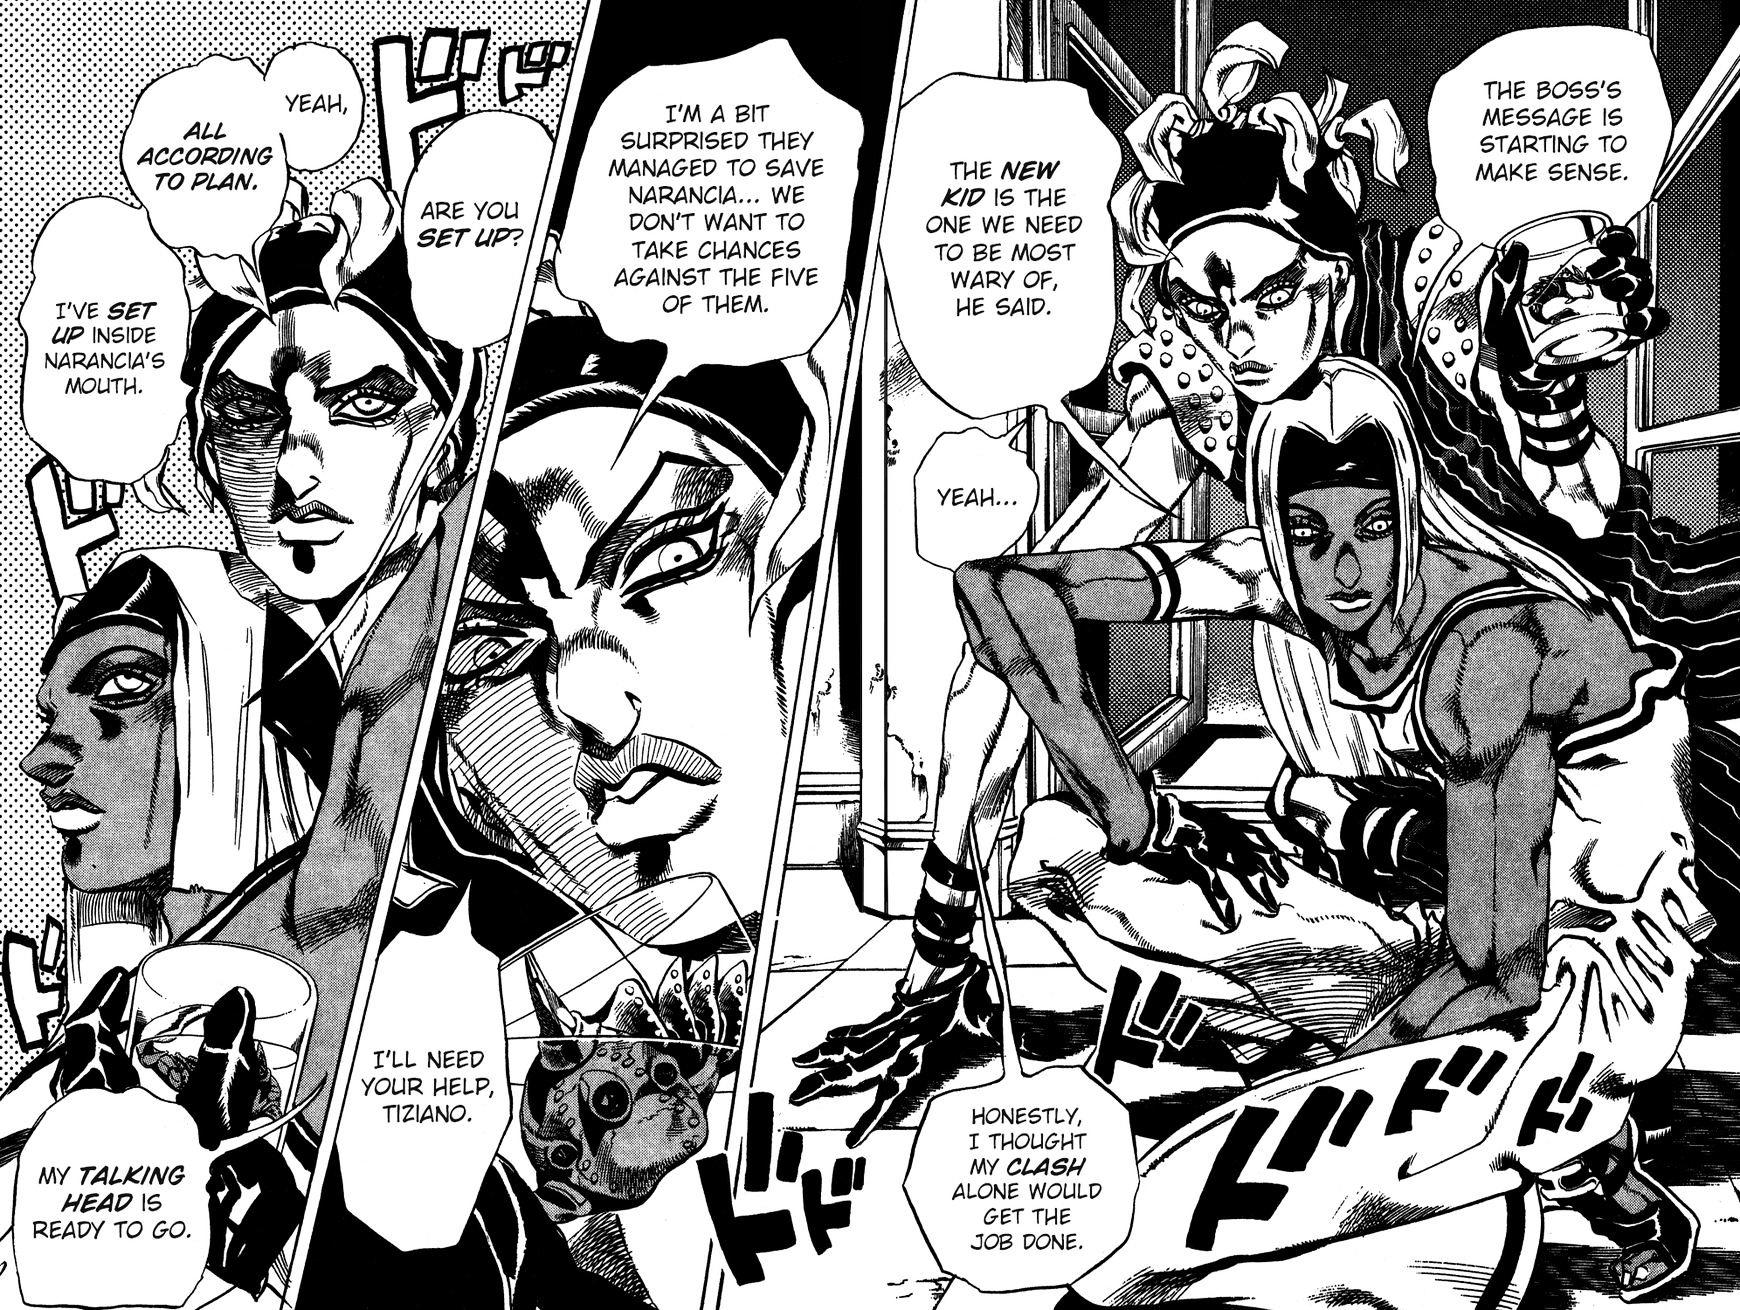 Jojo's Bizarre Adventure Vol.56 Chapter 525 : Clash And Taking Head - Part 1 page 15 - 